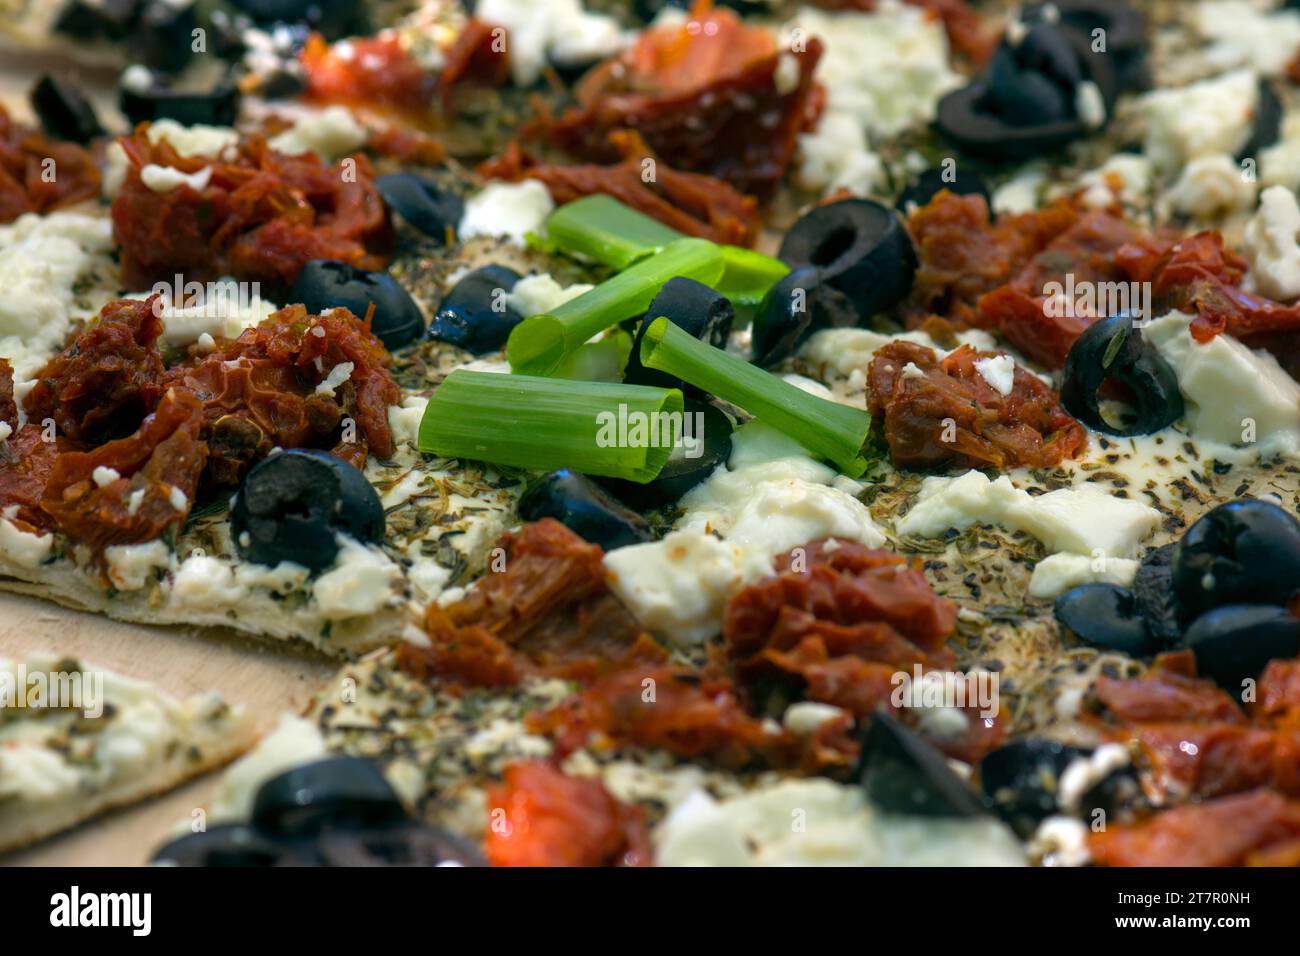 Tarte flambee with sun-dried tomatoes, feta cheese, olives and chives, close up, Bavaria, Germany Stock Photo